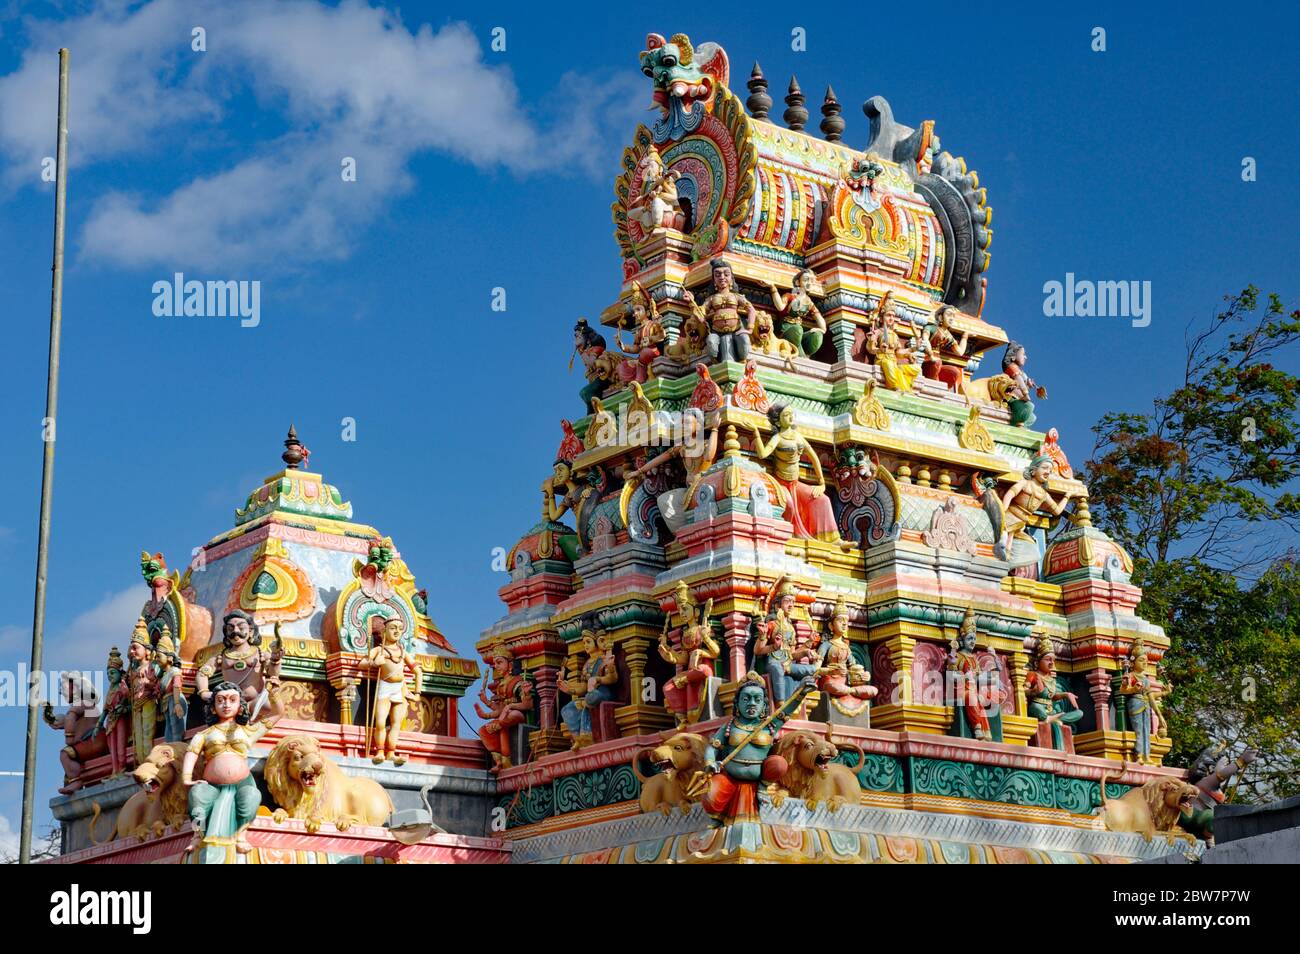 Top of an ancient Hindu temple in Mauritius Island. Mauritius, an Indian Ocean island nation, is known for its beaches lagoons and reefs. Stock Photo